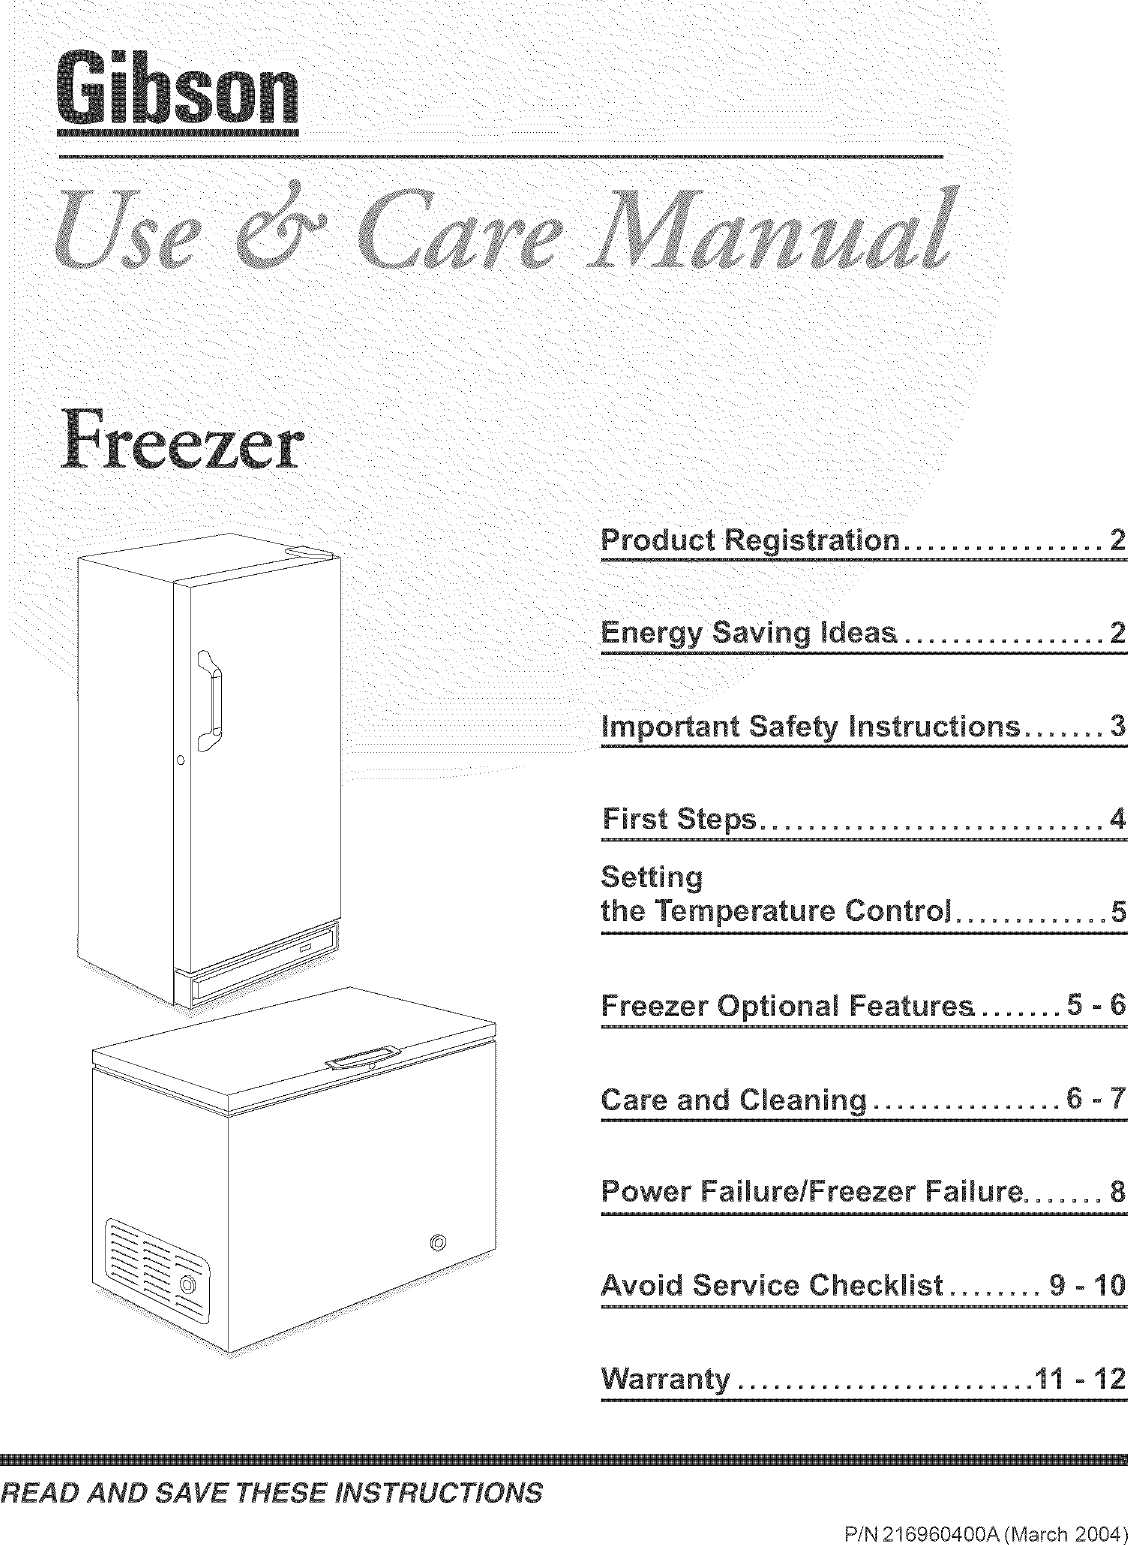 Page 1 of 12 - GIBSON  Upright Freezer Manual L0411337